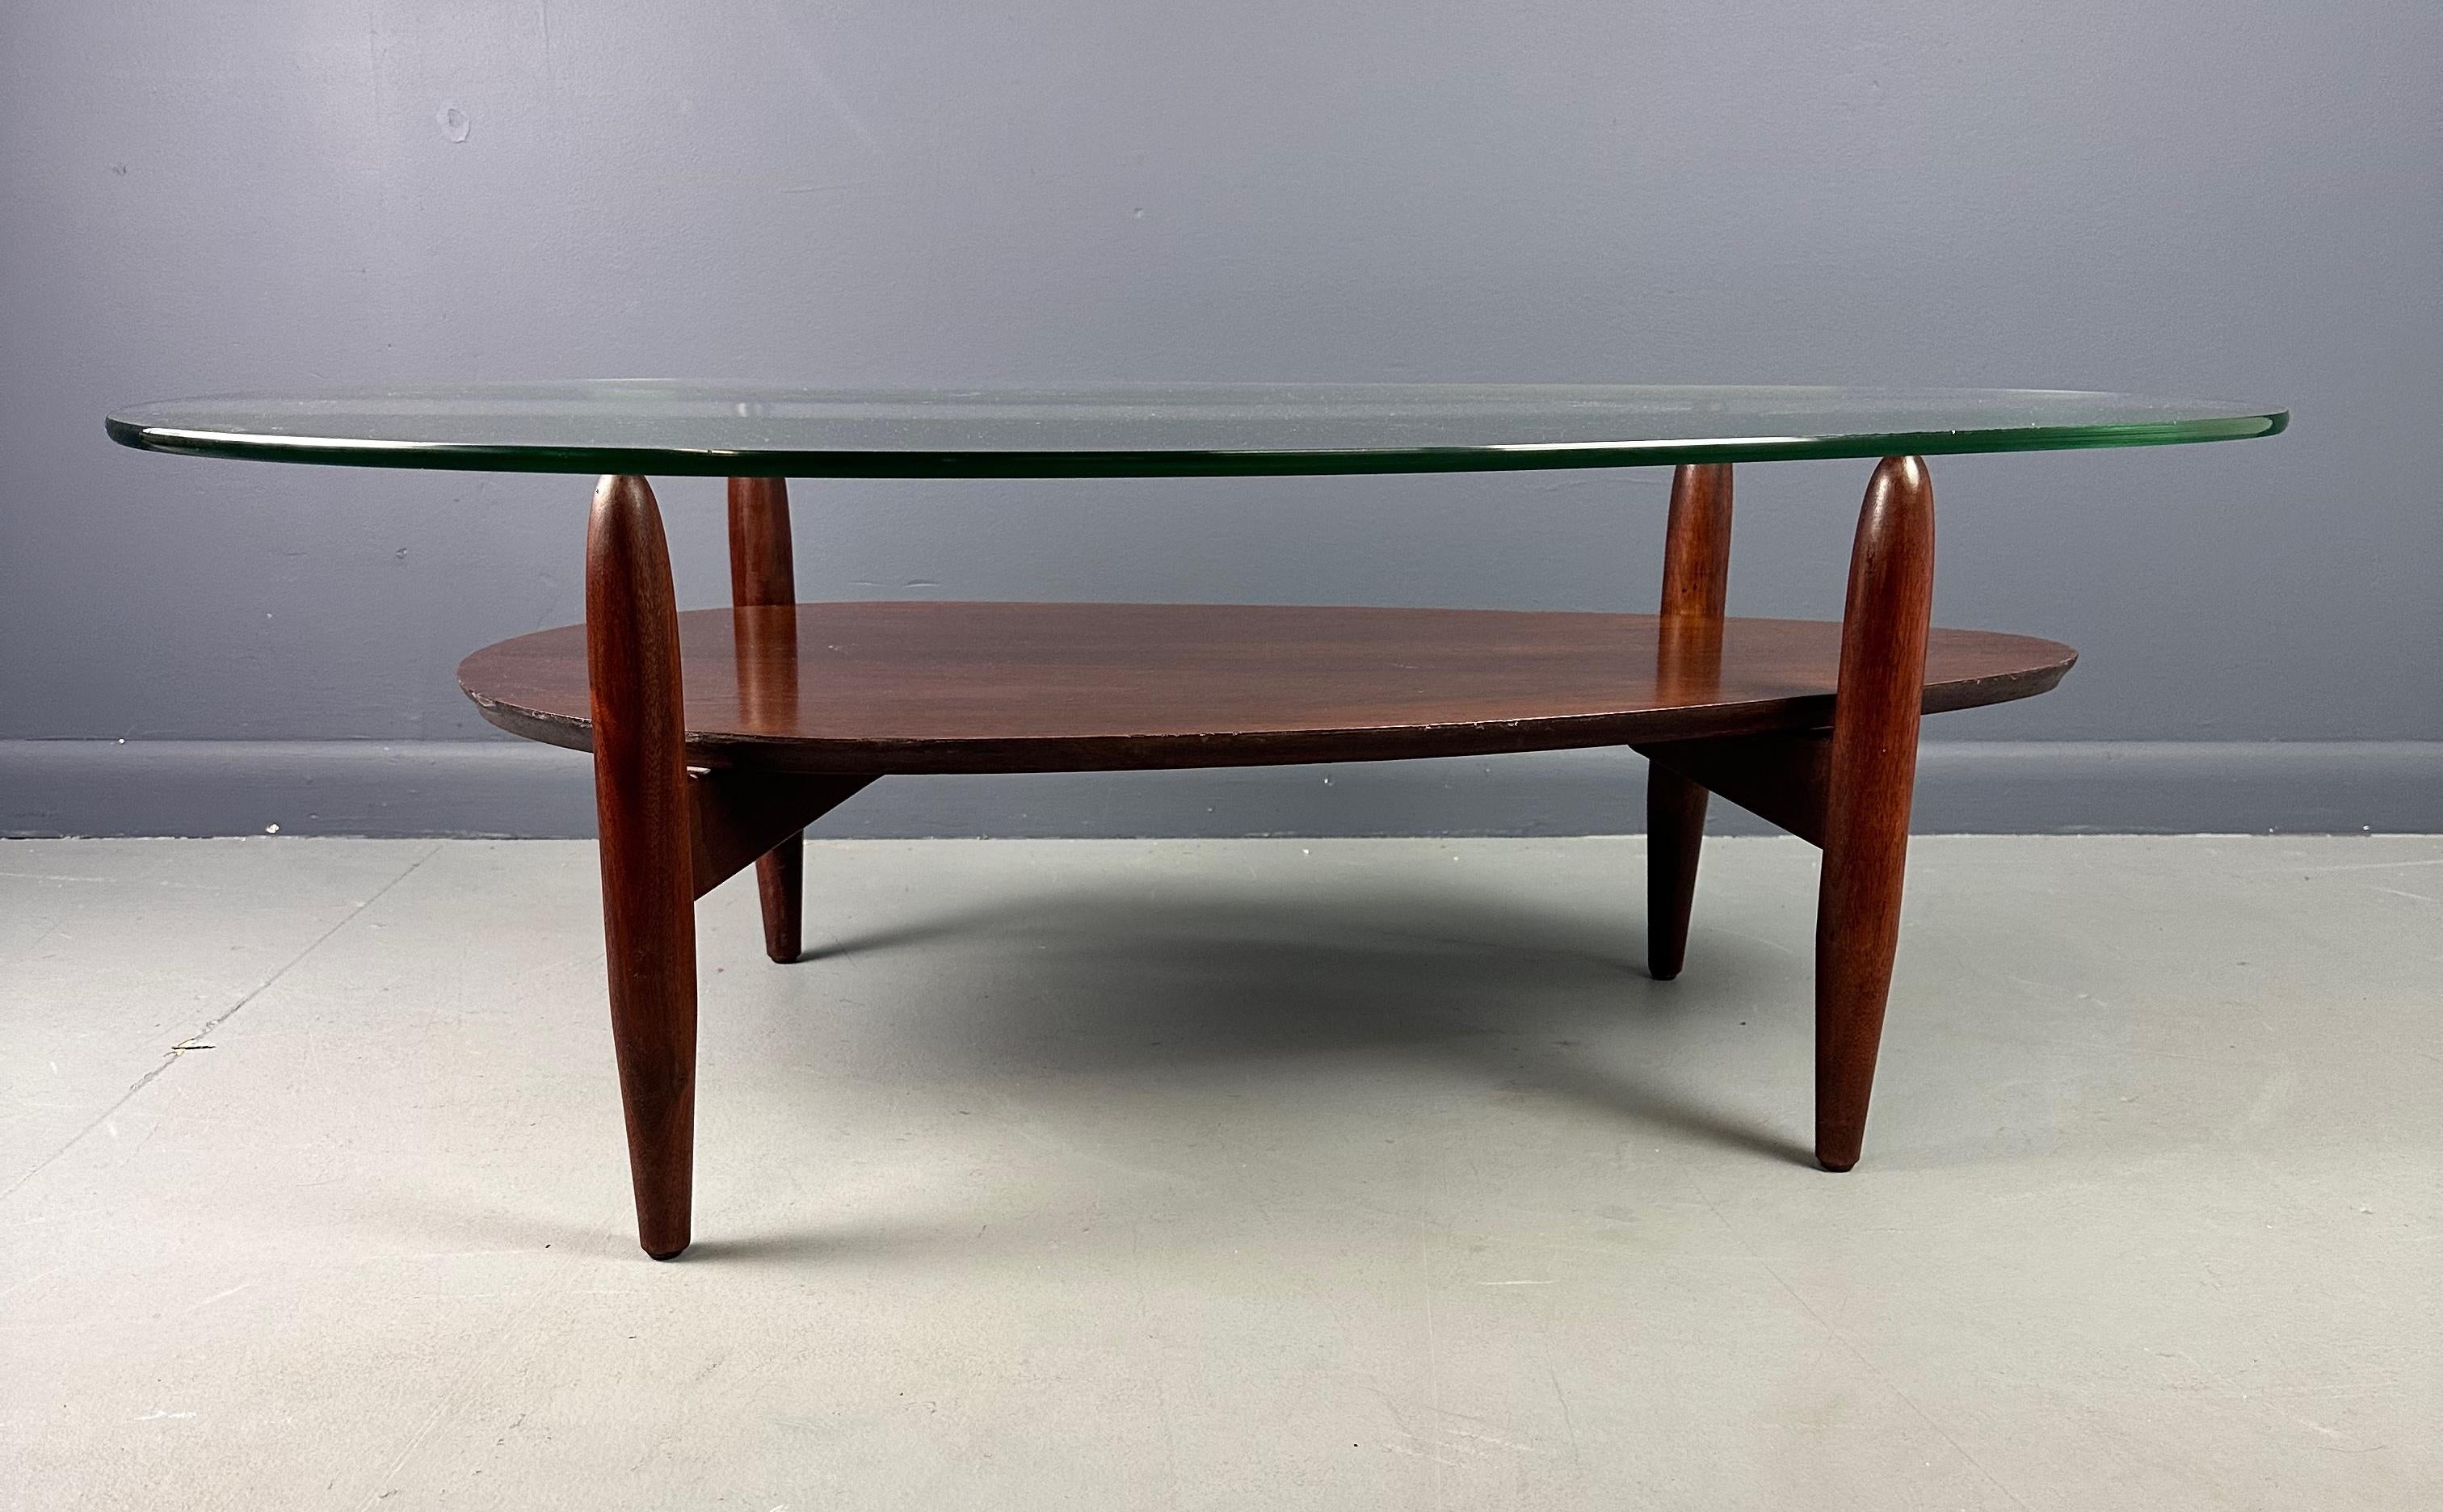 North American Sculptural Mid Century Teardrop Coffee Table in Walnut by Adrian Pearsall For Sale